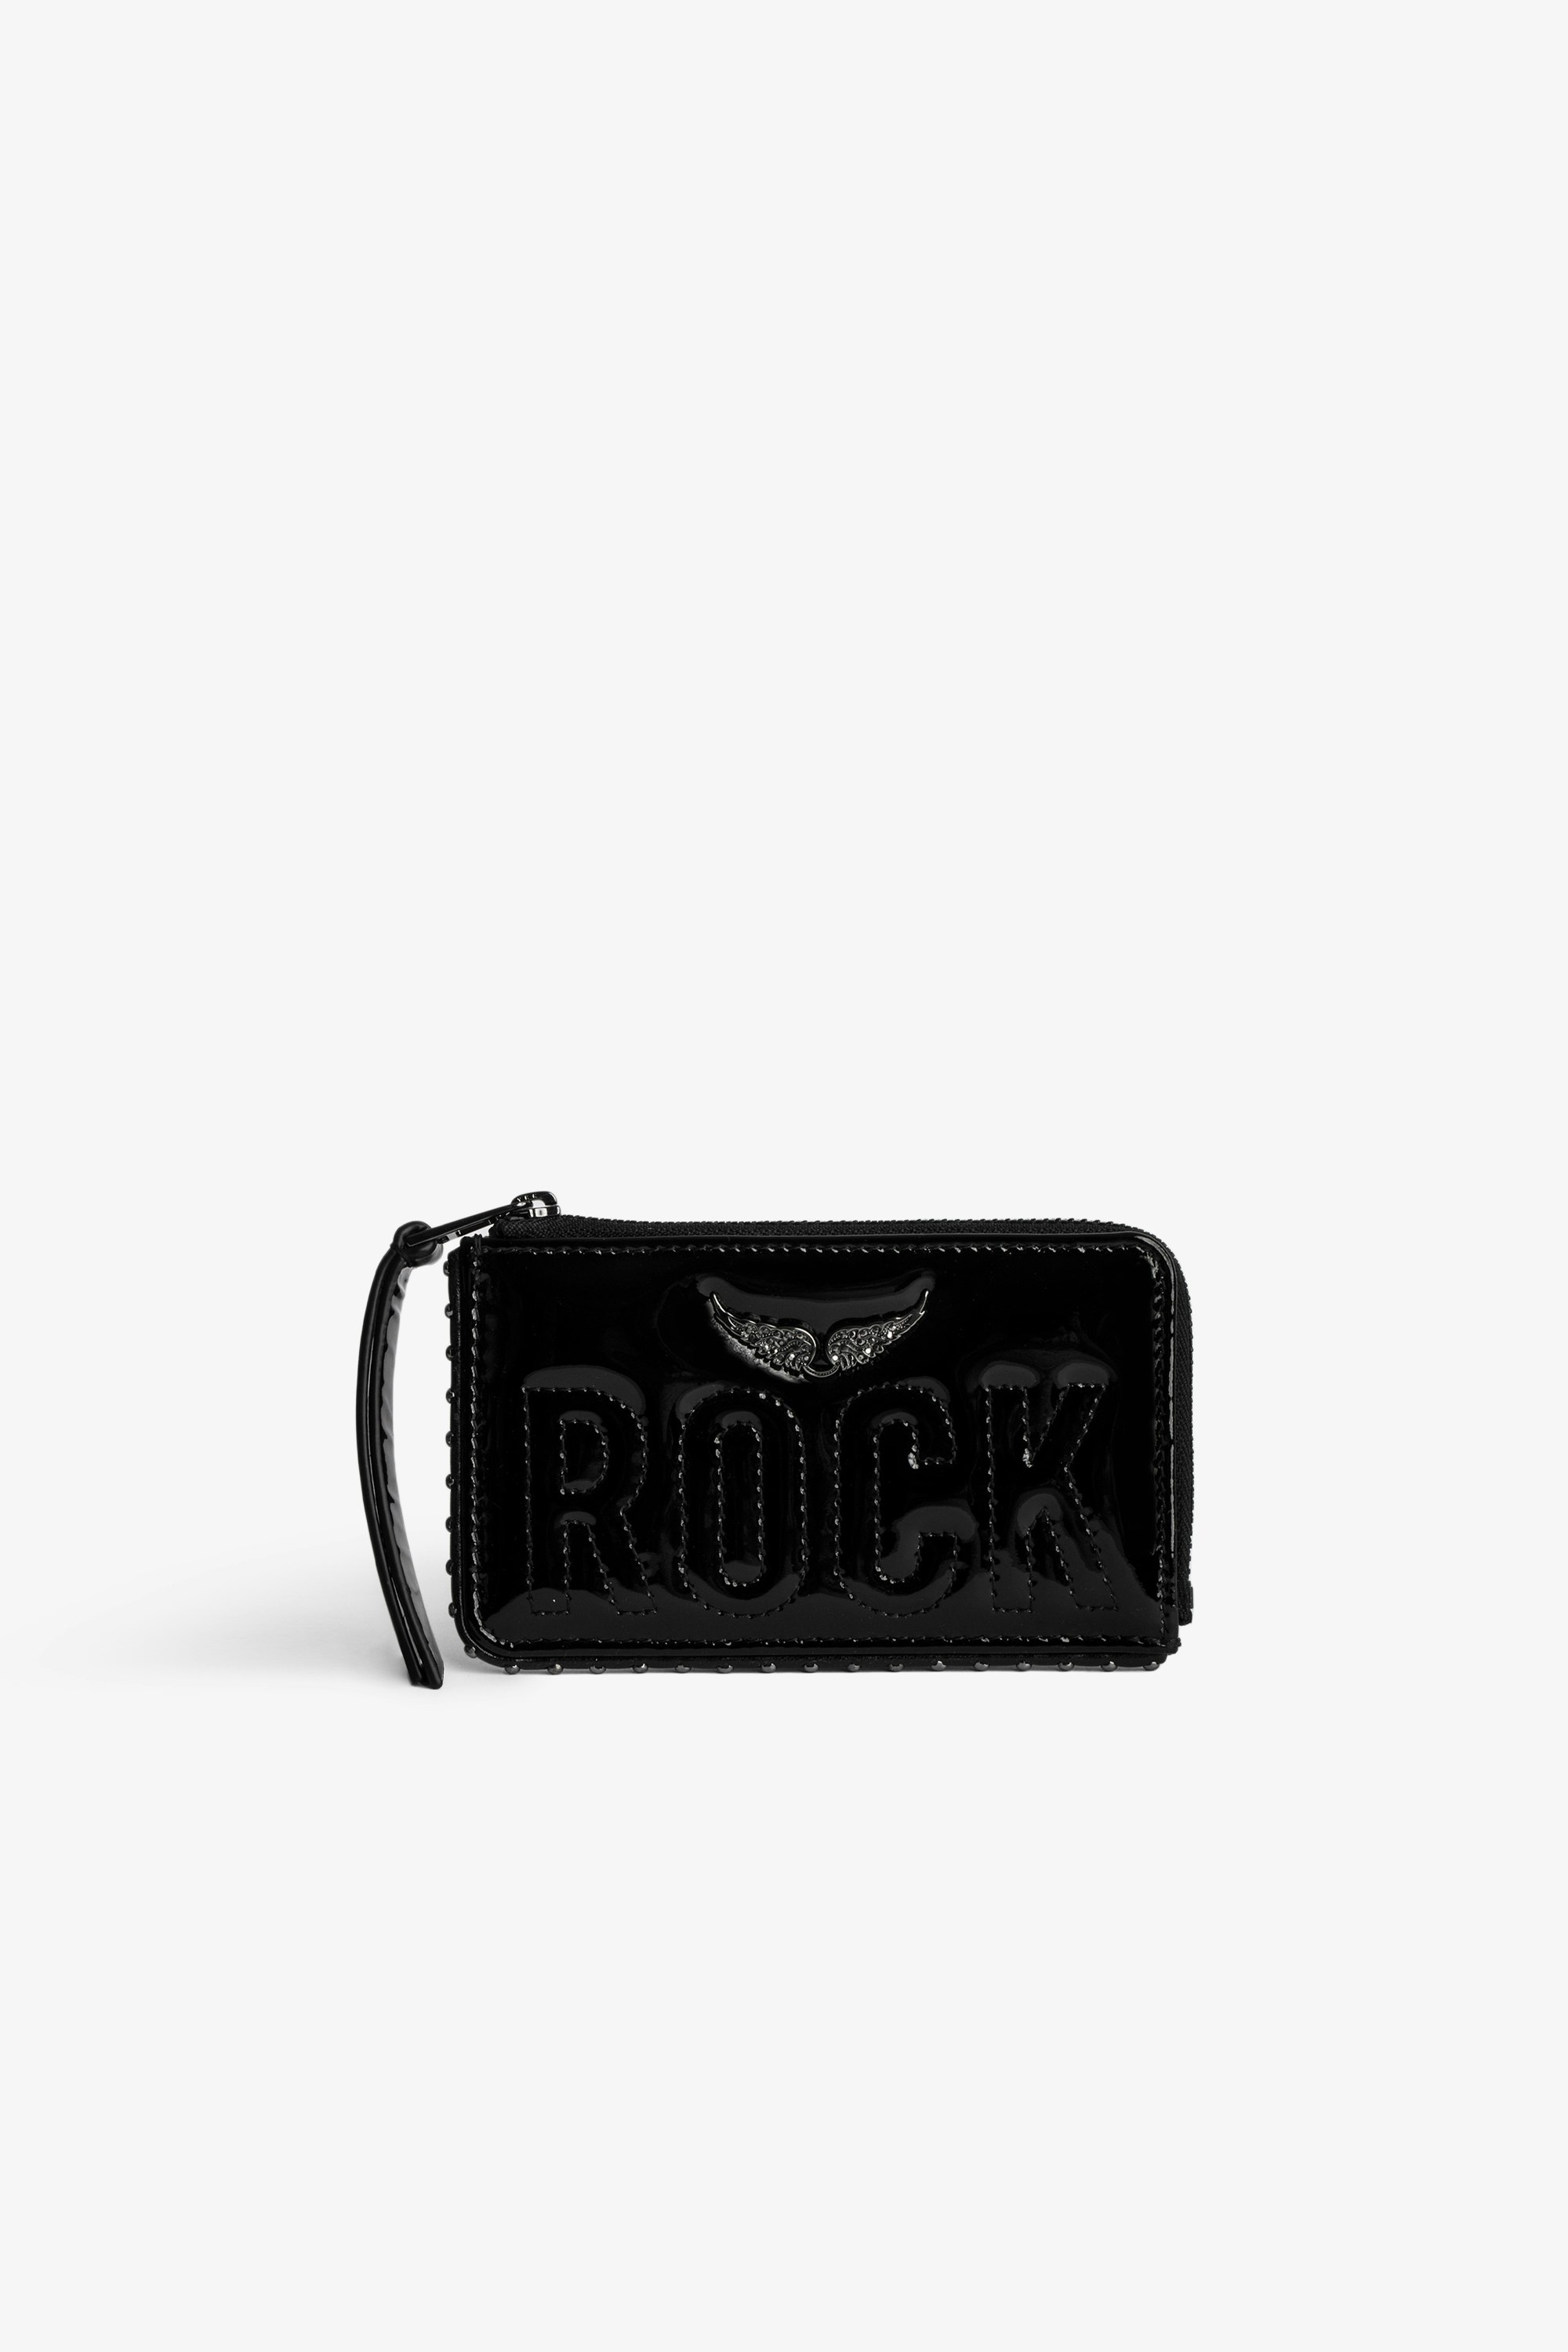 ZV Card Card Holder Women’s black patent leather zipped card holder with slots, topstitched “Rock” slogan and crystal-embellished wings charm